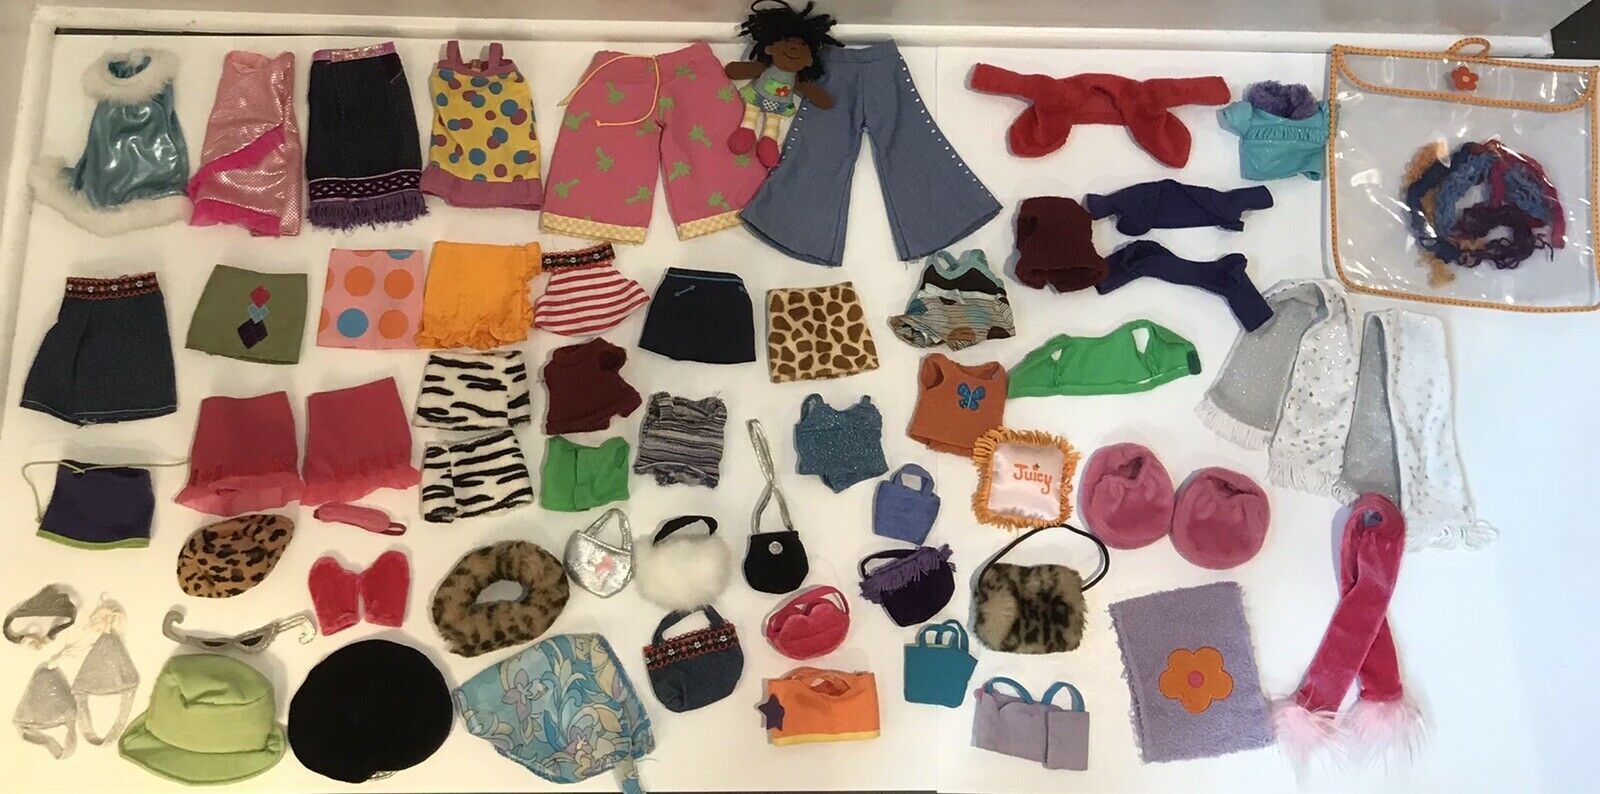 Groovy Girls Huge Clothes Lot, Handbags, Hats, Gloves, Scarves, Hair Extensions